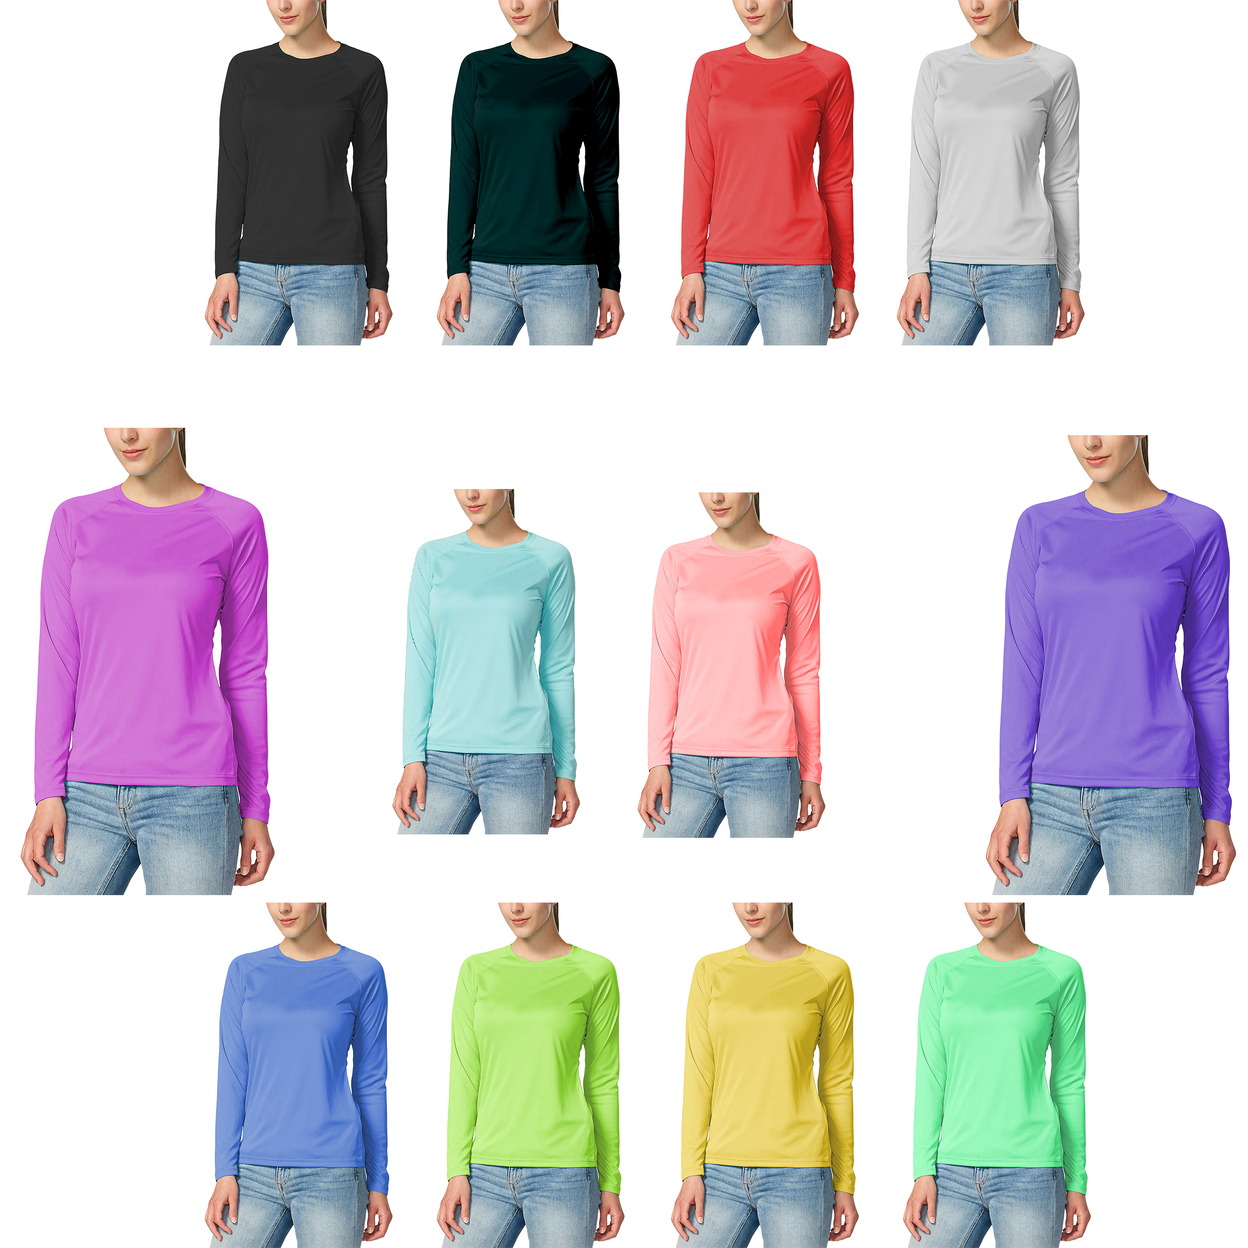 Multi-Pack: Women's Dri-Fit Moisture-Wicking Breathable Long Sleeve T-Shirt - 3-pack, Small